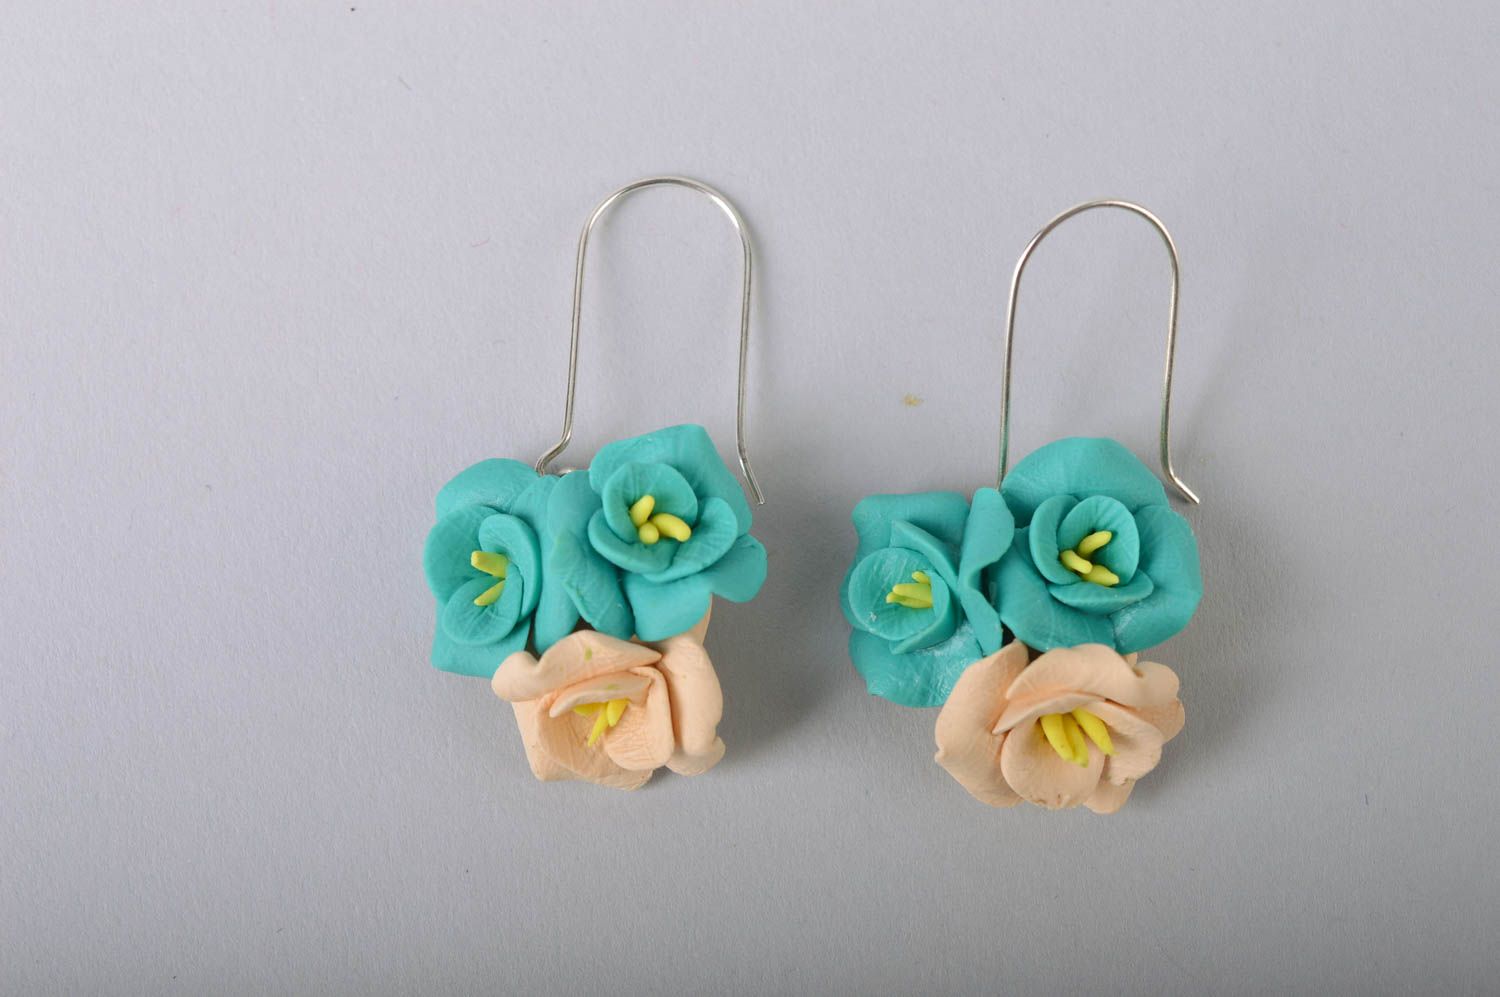 Handmade earrings with charms made of cold porcelain in pastel shades  photo 2